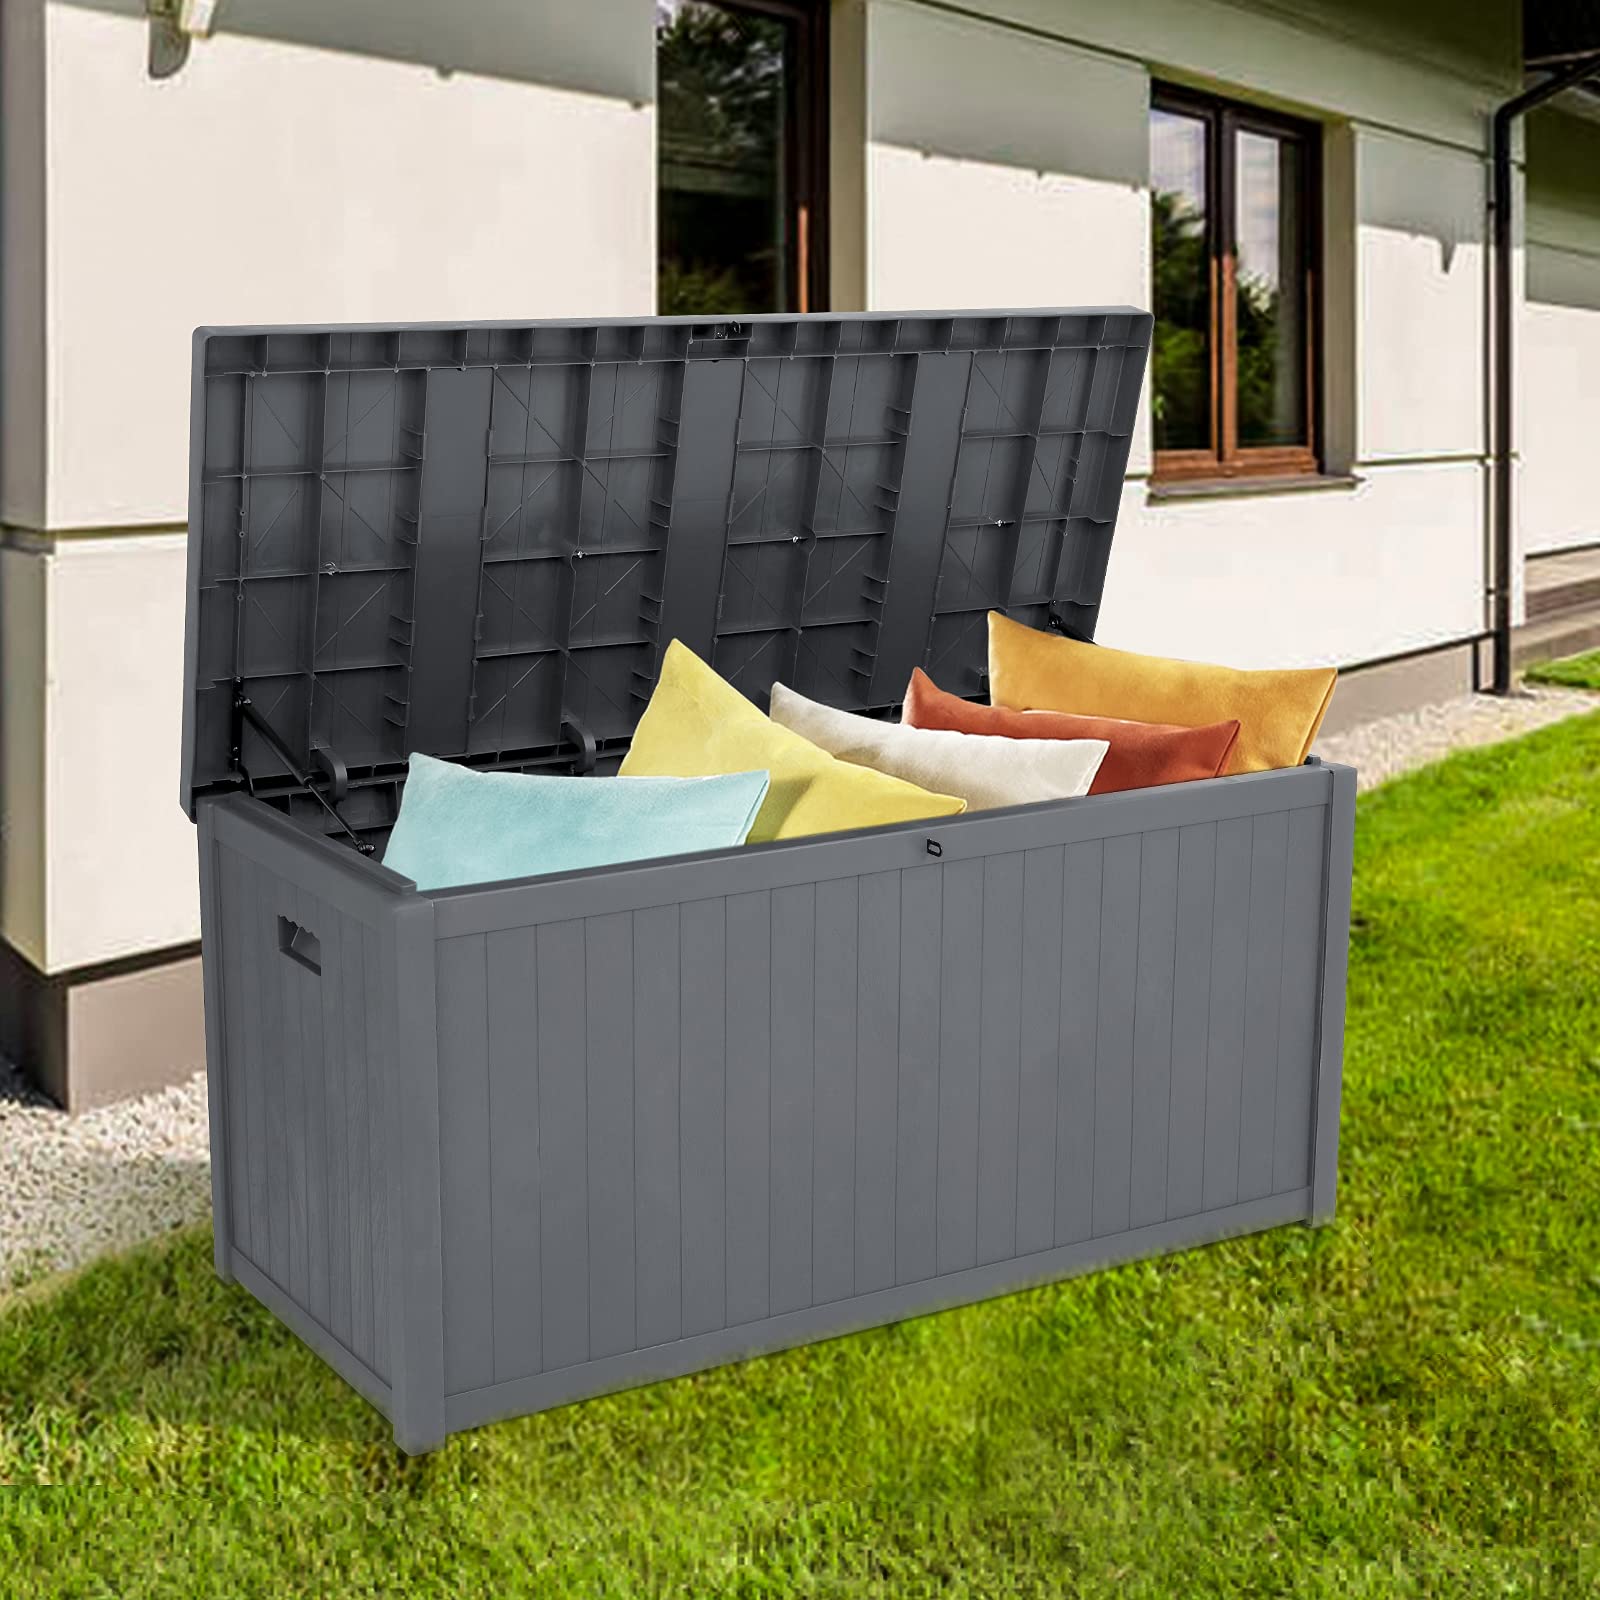 Outvita Outdoor Patio Garden Deck Storage Box, 113 Gallon Durable Storage Container Bin for Patio Cushions, Pool Toys and Yard Stools (Gray)